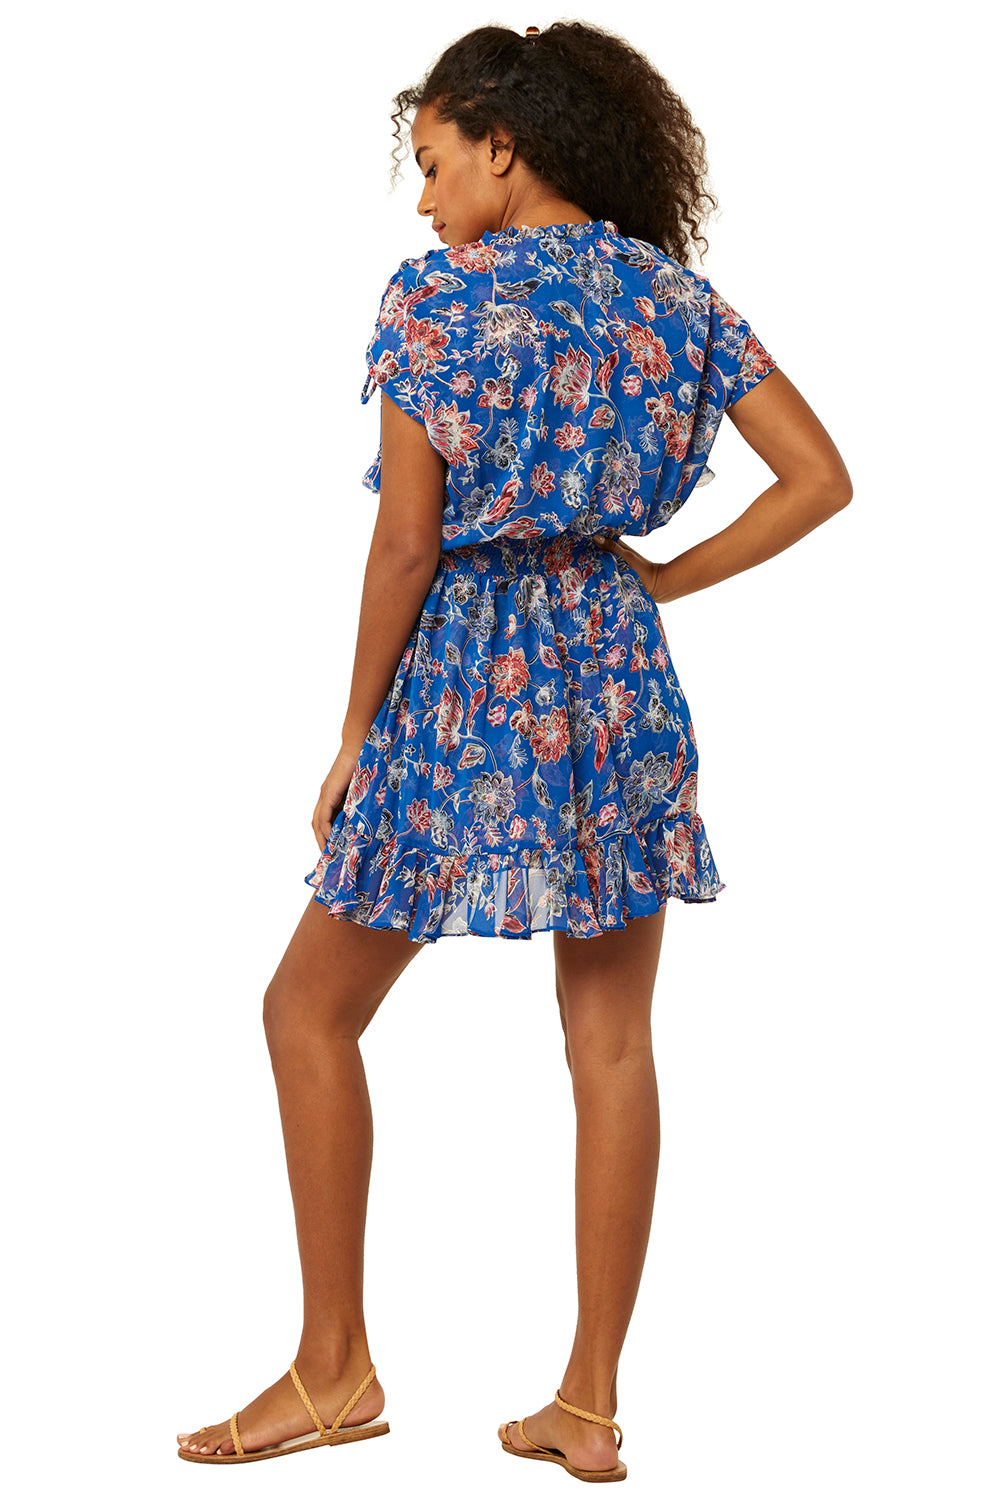 Misa - Dominique Dress in Sireneuse Floral